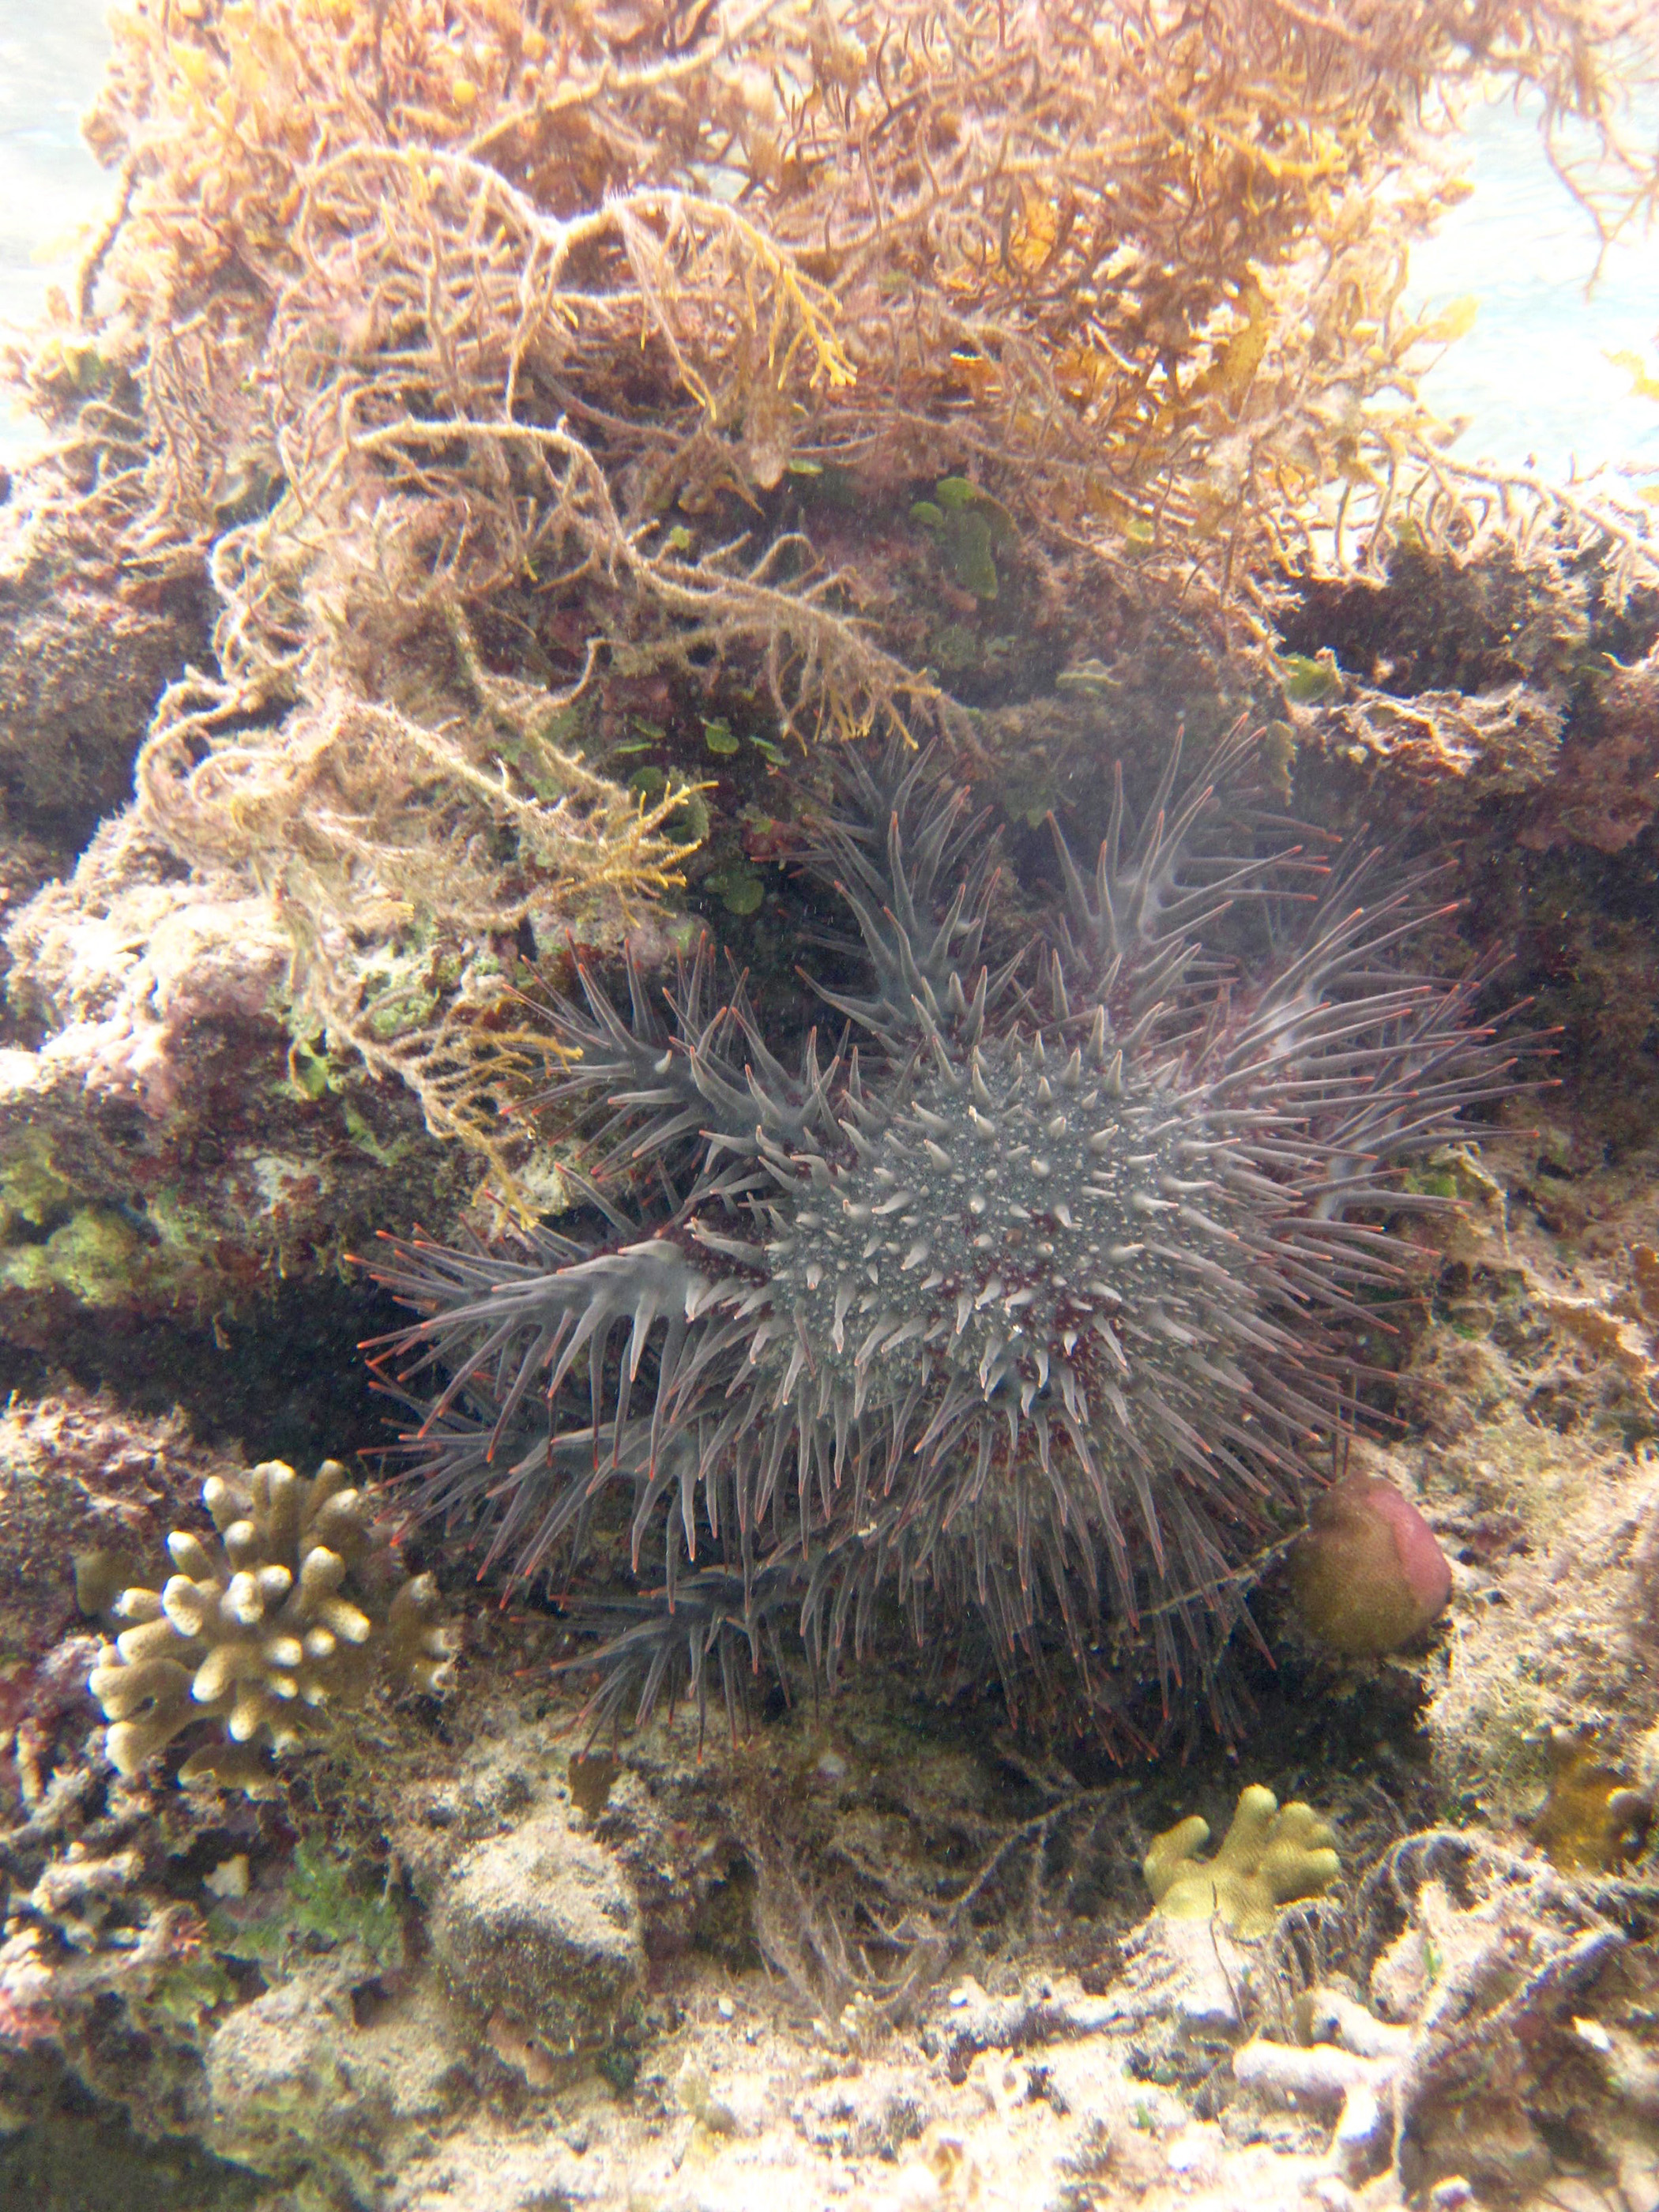 Images show a crown-of-thorns sea star feeding on exposed coral, below a large tuft of Sargassum seaweed. The organism climbs on top of the coral to extrude its stomach and digest the tissue of the coral. The photos were taken in the non-protected fishing area on Votua Reef, on the Coral Coast of the Fiji Islands. (Credit: Cody Clements, Georgia Tech)